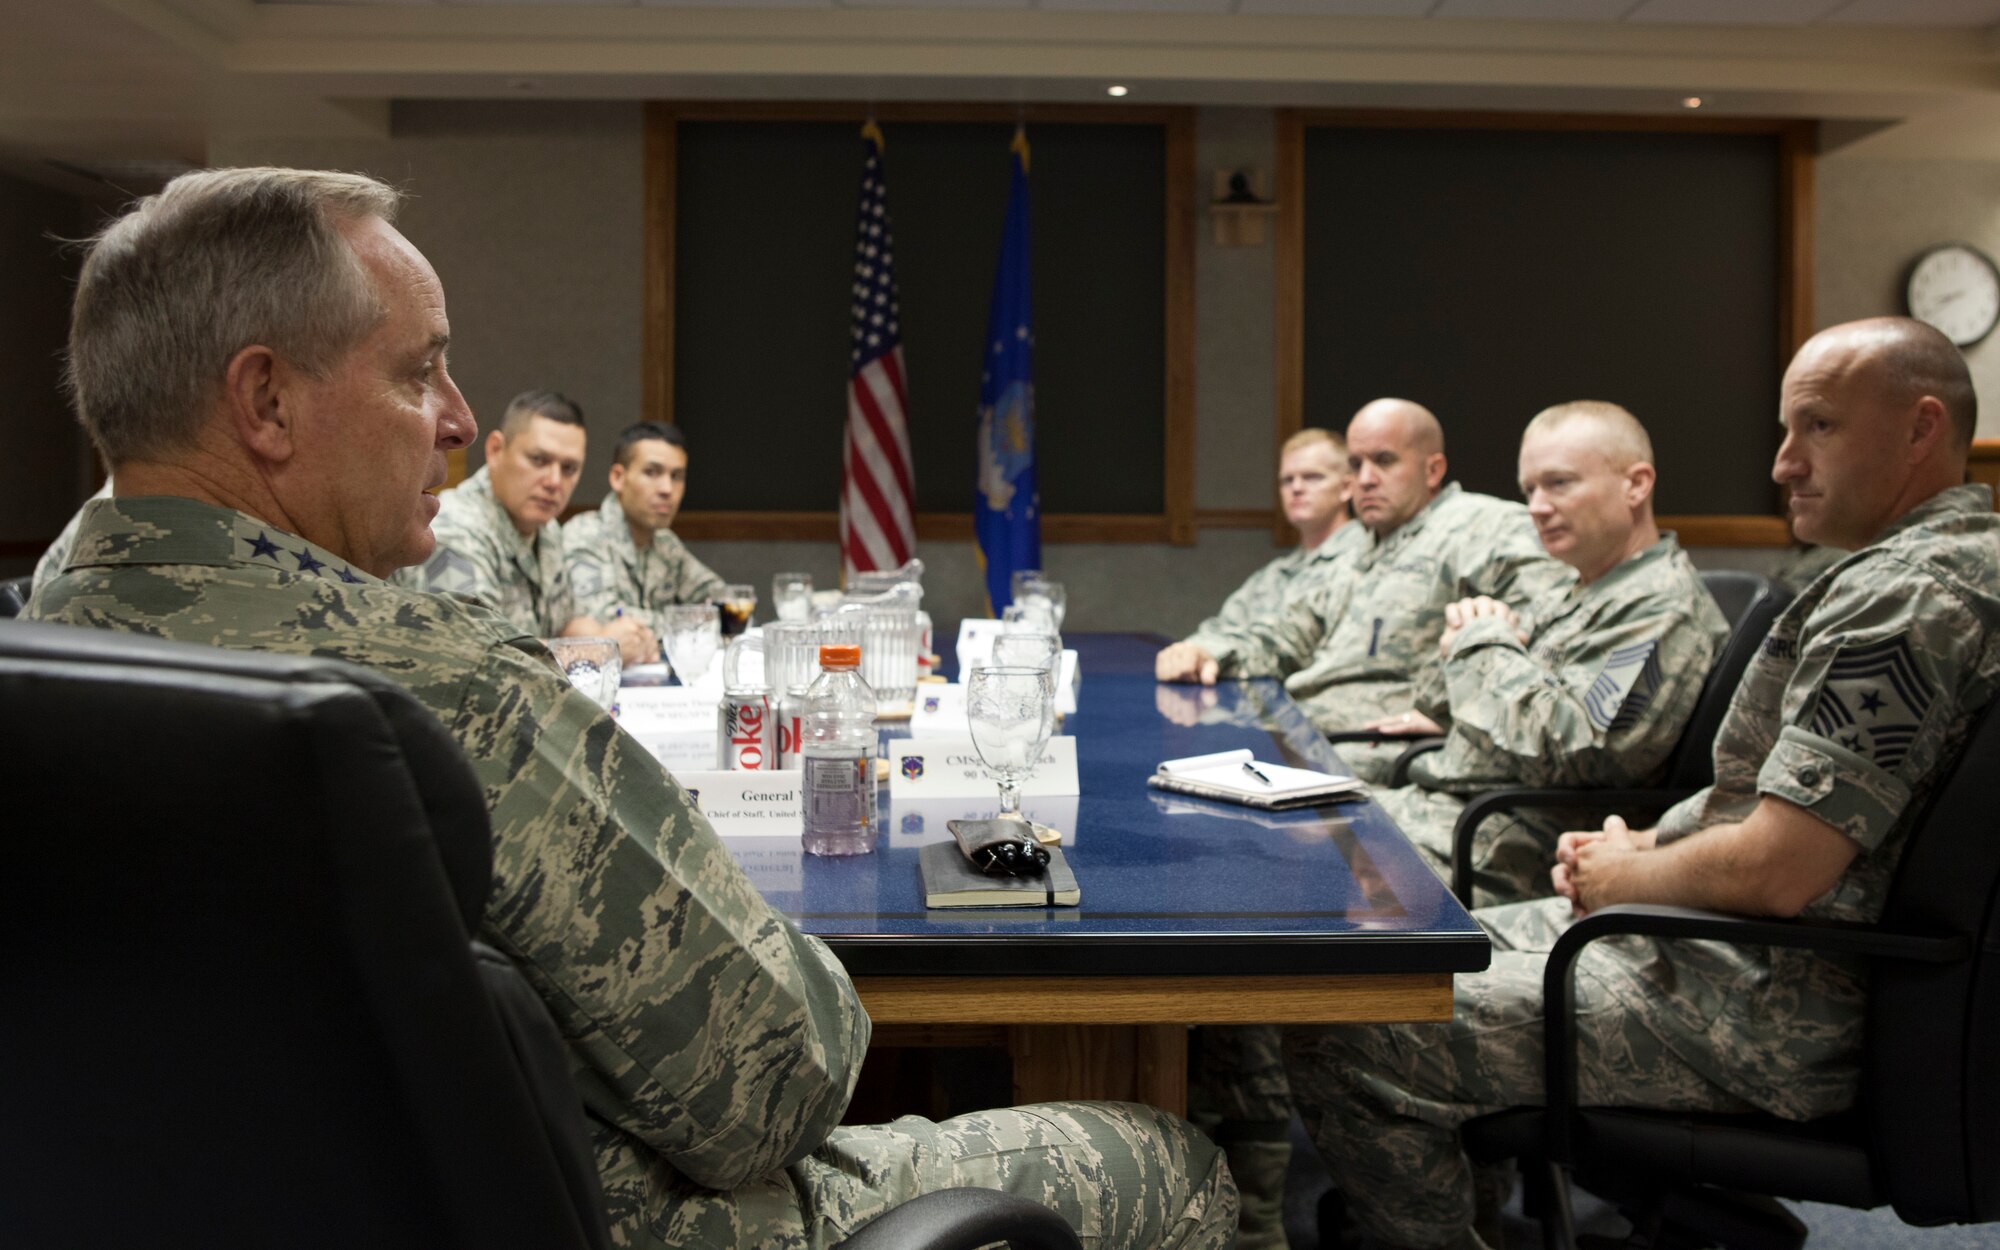 Air Force Chief of Staff Gen. Mark A. Welsh III meets with 90th Missile Wing's Top Three organization on F.E. Warren Air Force Base, Wyo., Aug. 4, 2015. Welsh visited Warren to reinforce nuclear mission responsibilities, demands and expectations to ensure the Air Force's nuclear deterrence mission complies with the rigorous standards the nuclear enterprise requires. (U.S. Air Force photo by Lan Kim)